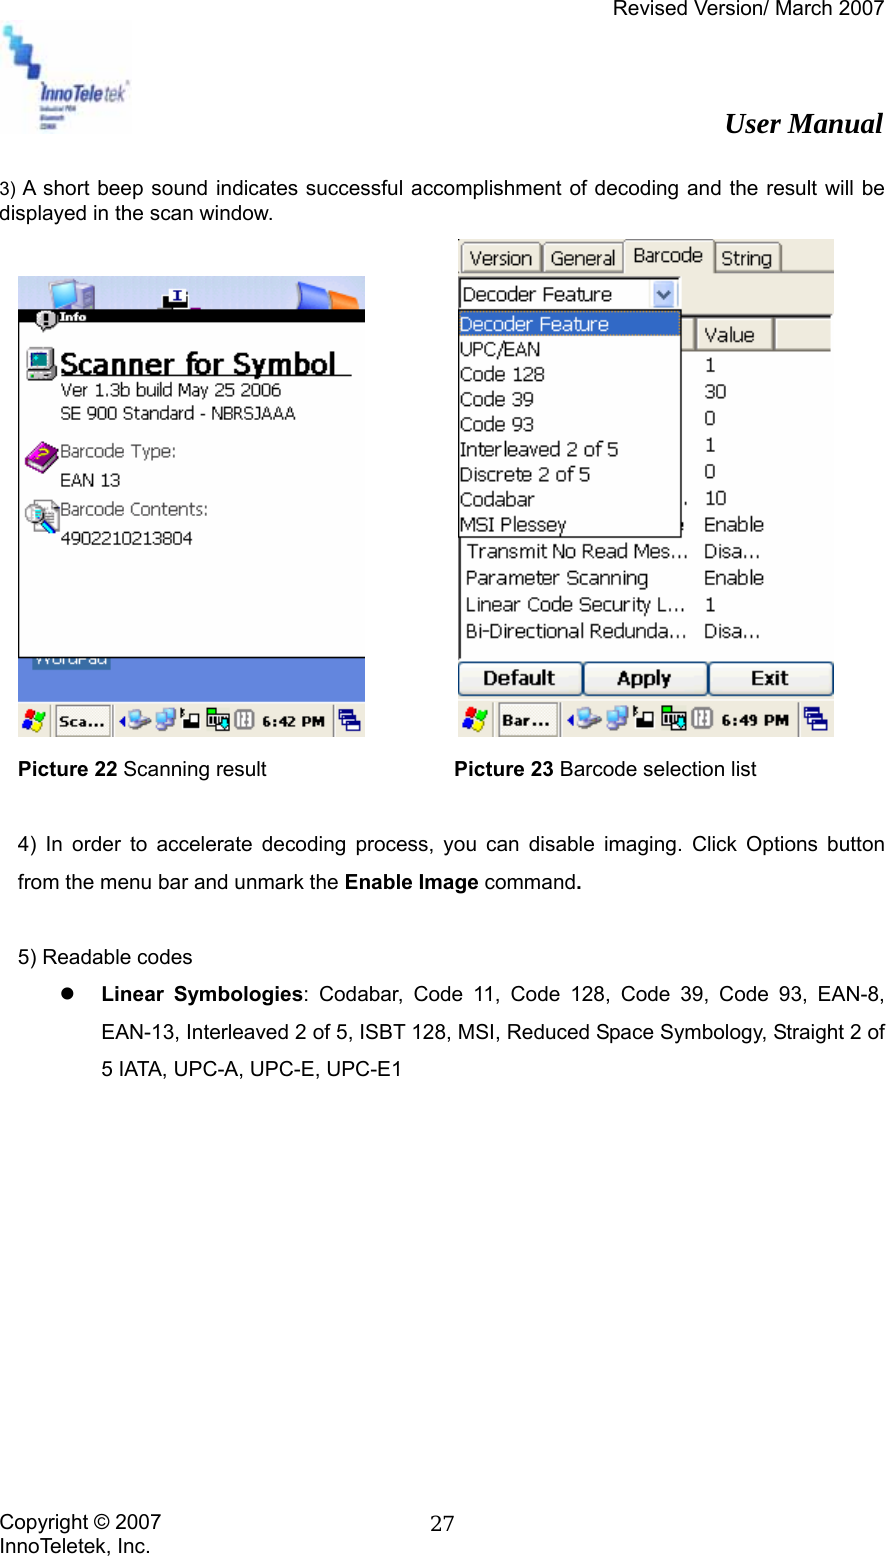 Revised Version/ March 2007                                                          User Manual Copyright © 2007 InnoTeletek, Inc.  27 3) A short beep sound indicates successful accomplishment of decoding and the result will be displayed in the scan window.            Picture 22 Scanning result                  Picture 23 Barcode selection list  4) In order to accelerate decoding process, you can disable imaging. Click Options button from the menu bar and unmark the Enable Image command.    5) Readable codes z Linear Symbologies: Codabar, Code 11, Code 128, Code 39, Code 93, EAN-8, EAN-13, Interleaved 2 of 5, ISBT 128, MSI, Reduced Space Symbology, Straight 2 of 5 IATA, UPC-A, UPC-E, UPC-E1           